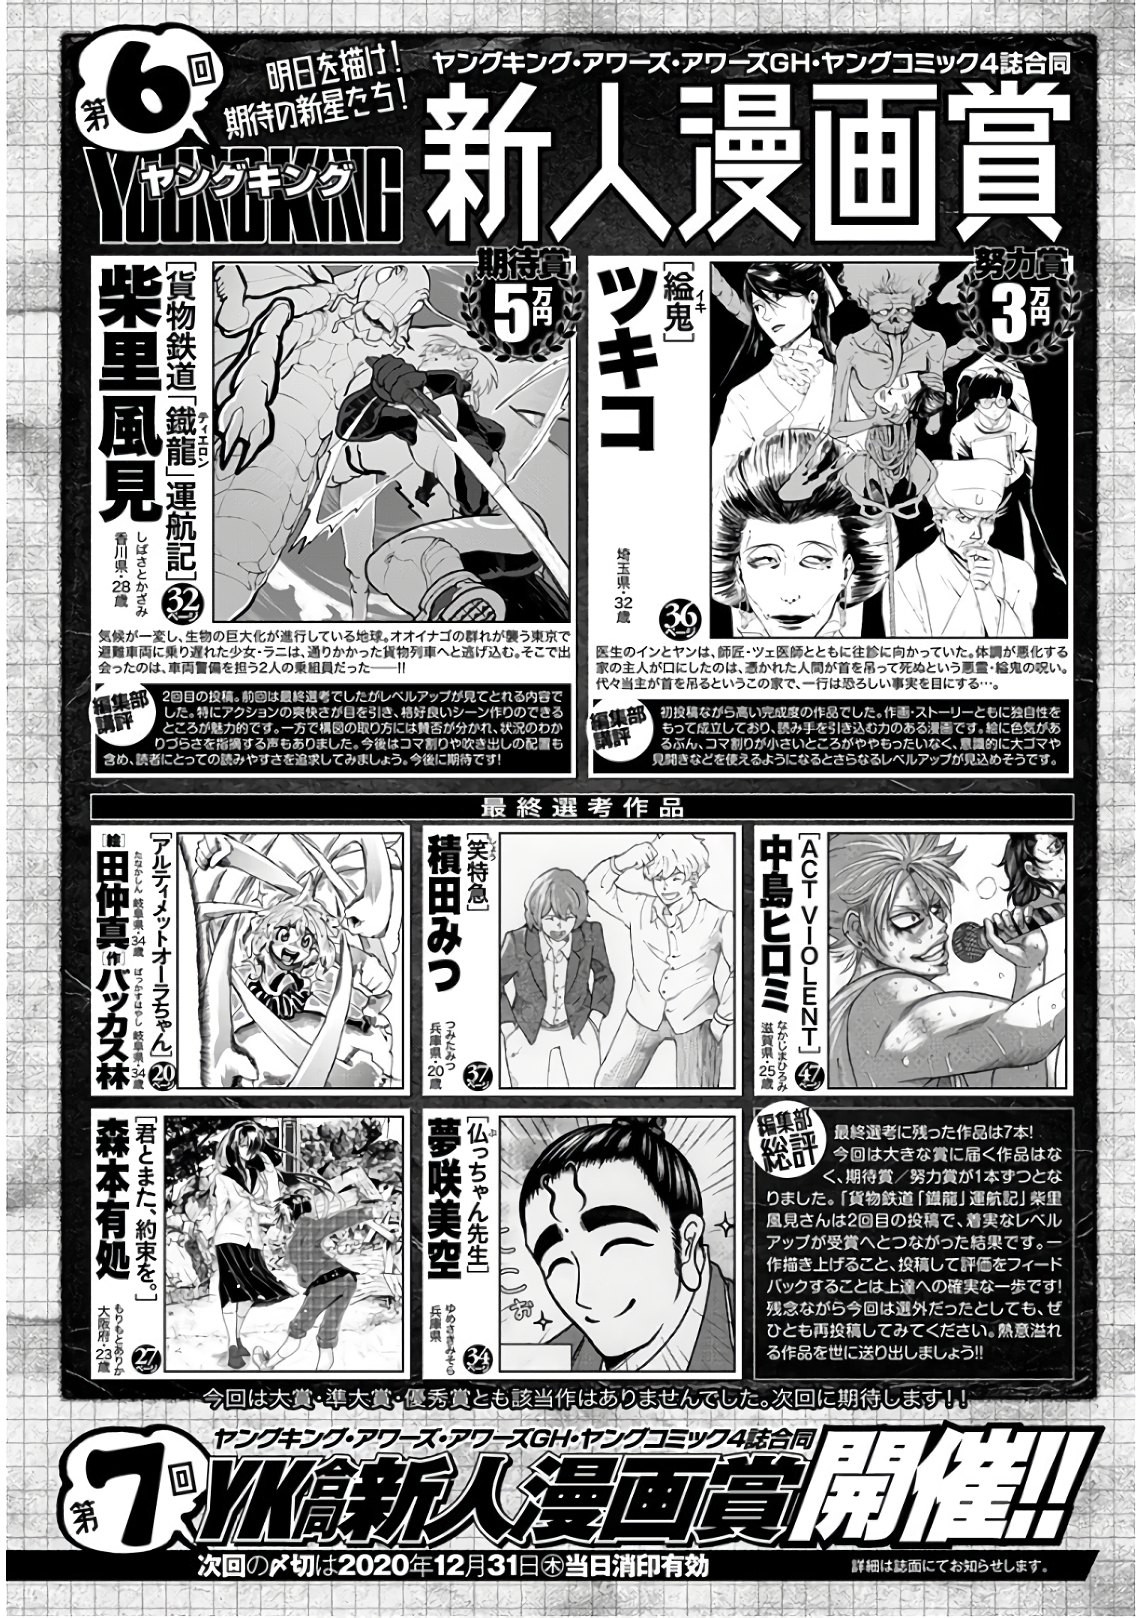 Young King Ours Gh Chapter 08 Page 3 Raw Sen Manga